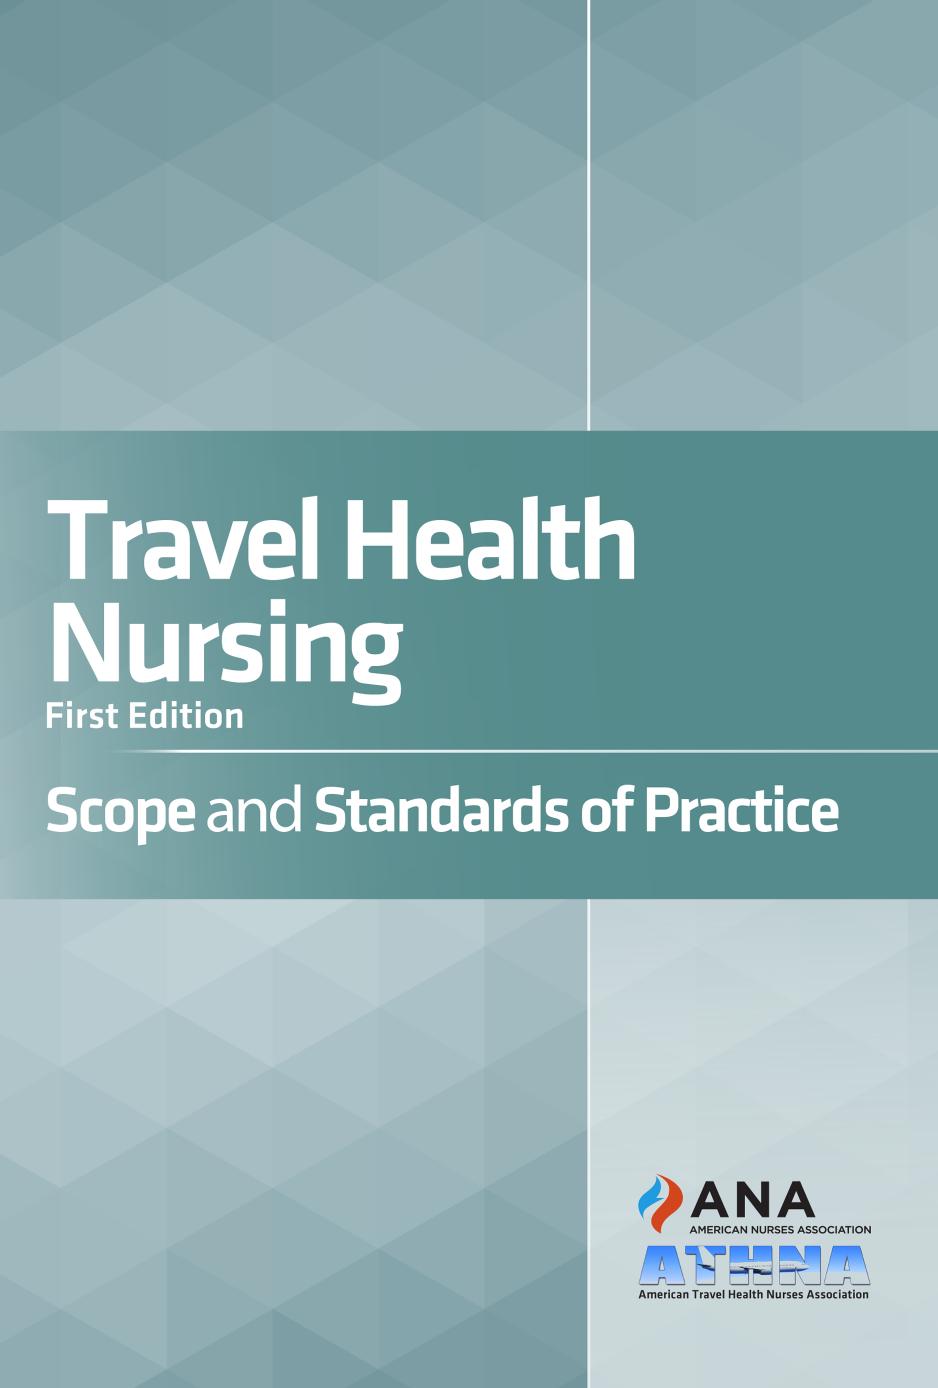 Travel Health Nursing: Scope and Standards of Practice, 1st Edition